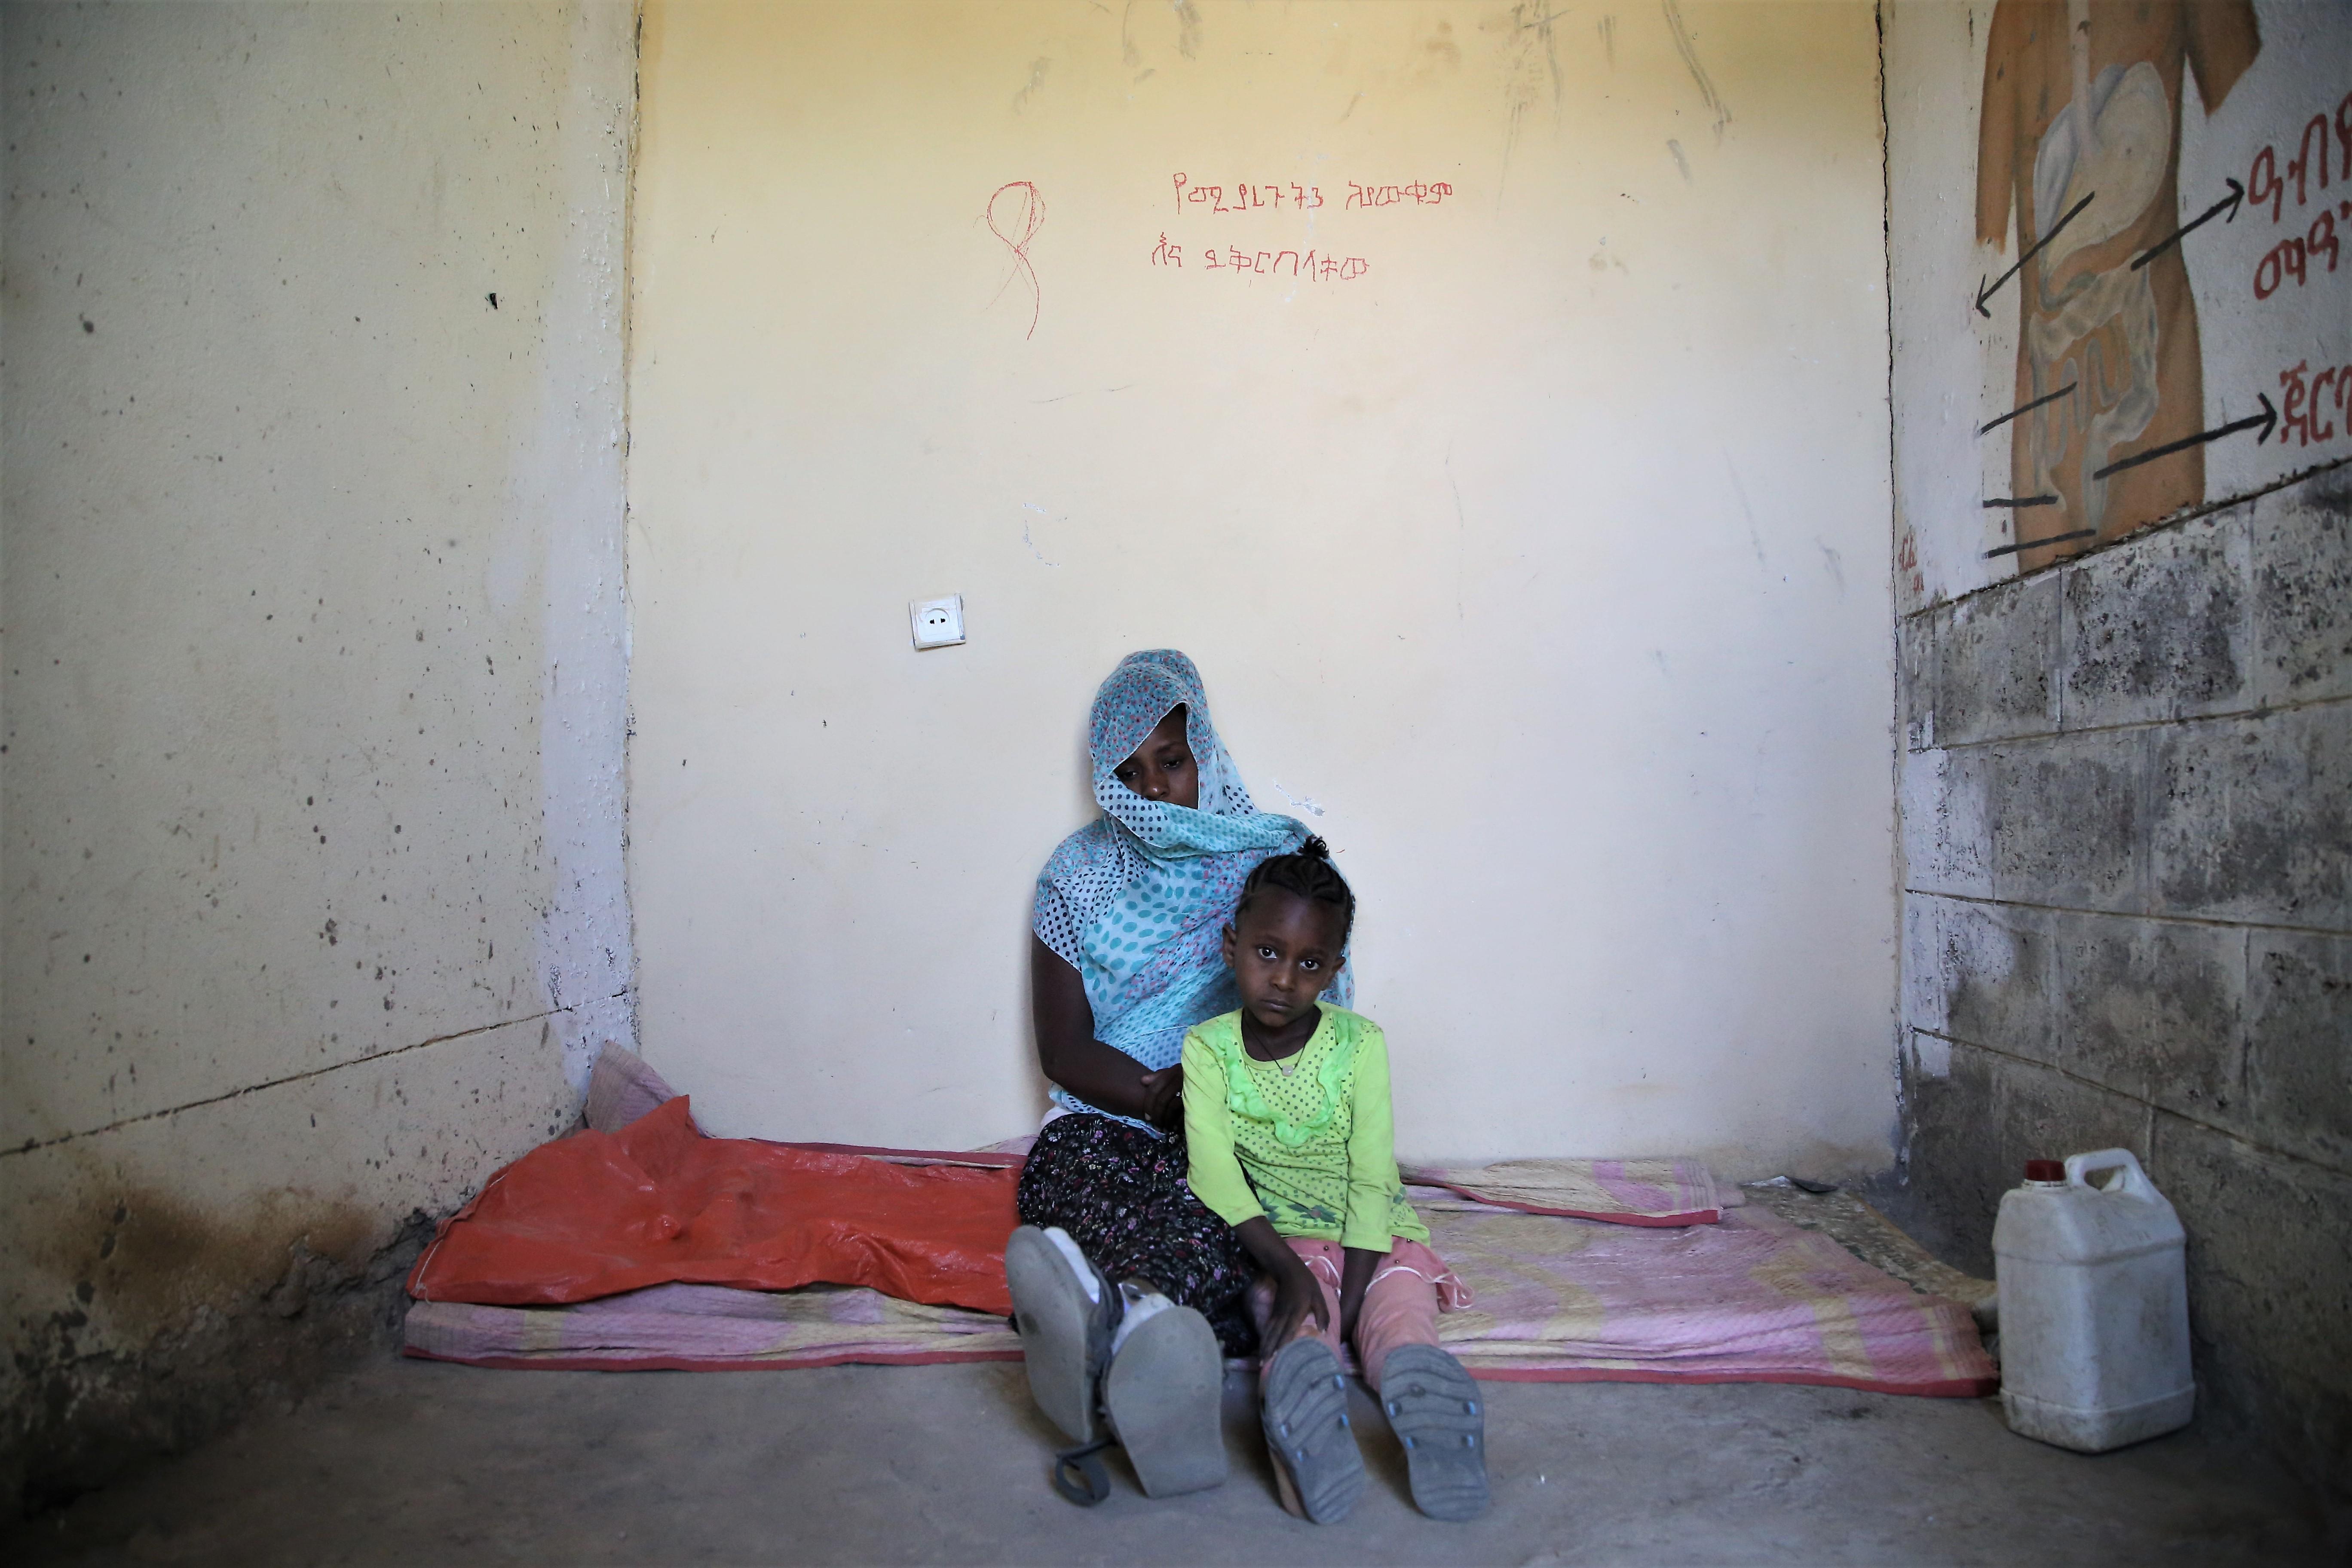 Leterbrhan (pseudonym) lies with her five-year-old daughter in a small room where around 20 people sleep at the elementary school in Abi Adi, a town in central Tigray. Schools have become informal settlements for displaced people fleeing the conflict in this northern region of Ethiopia. 